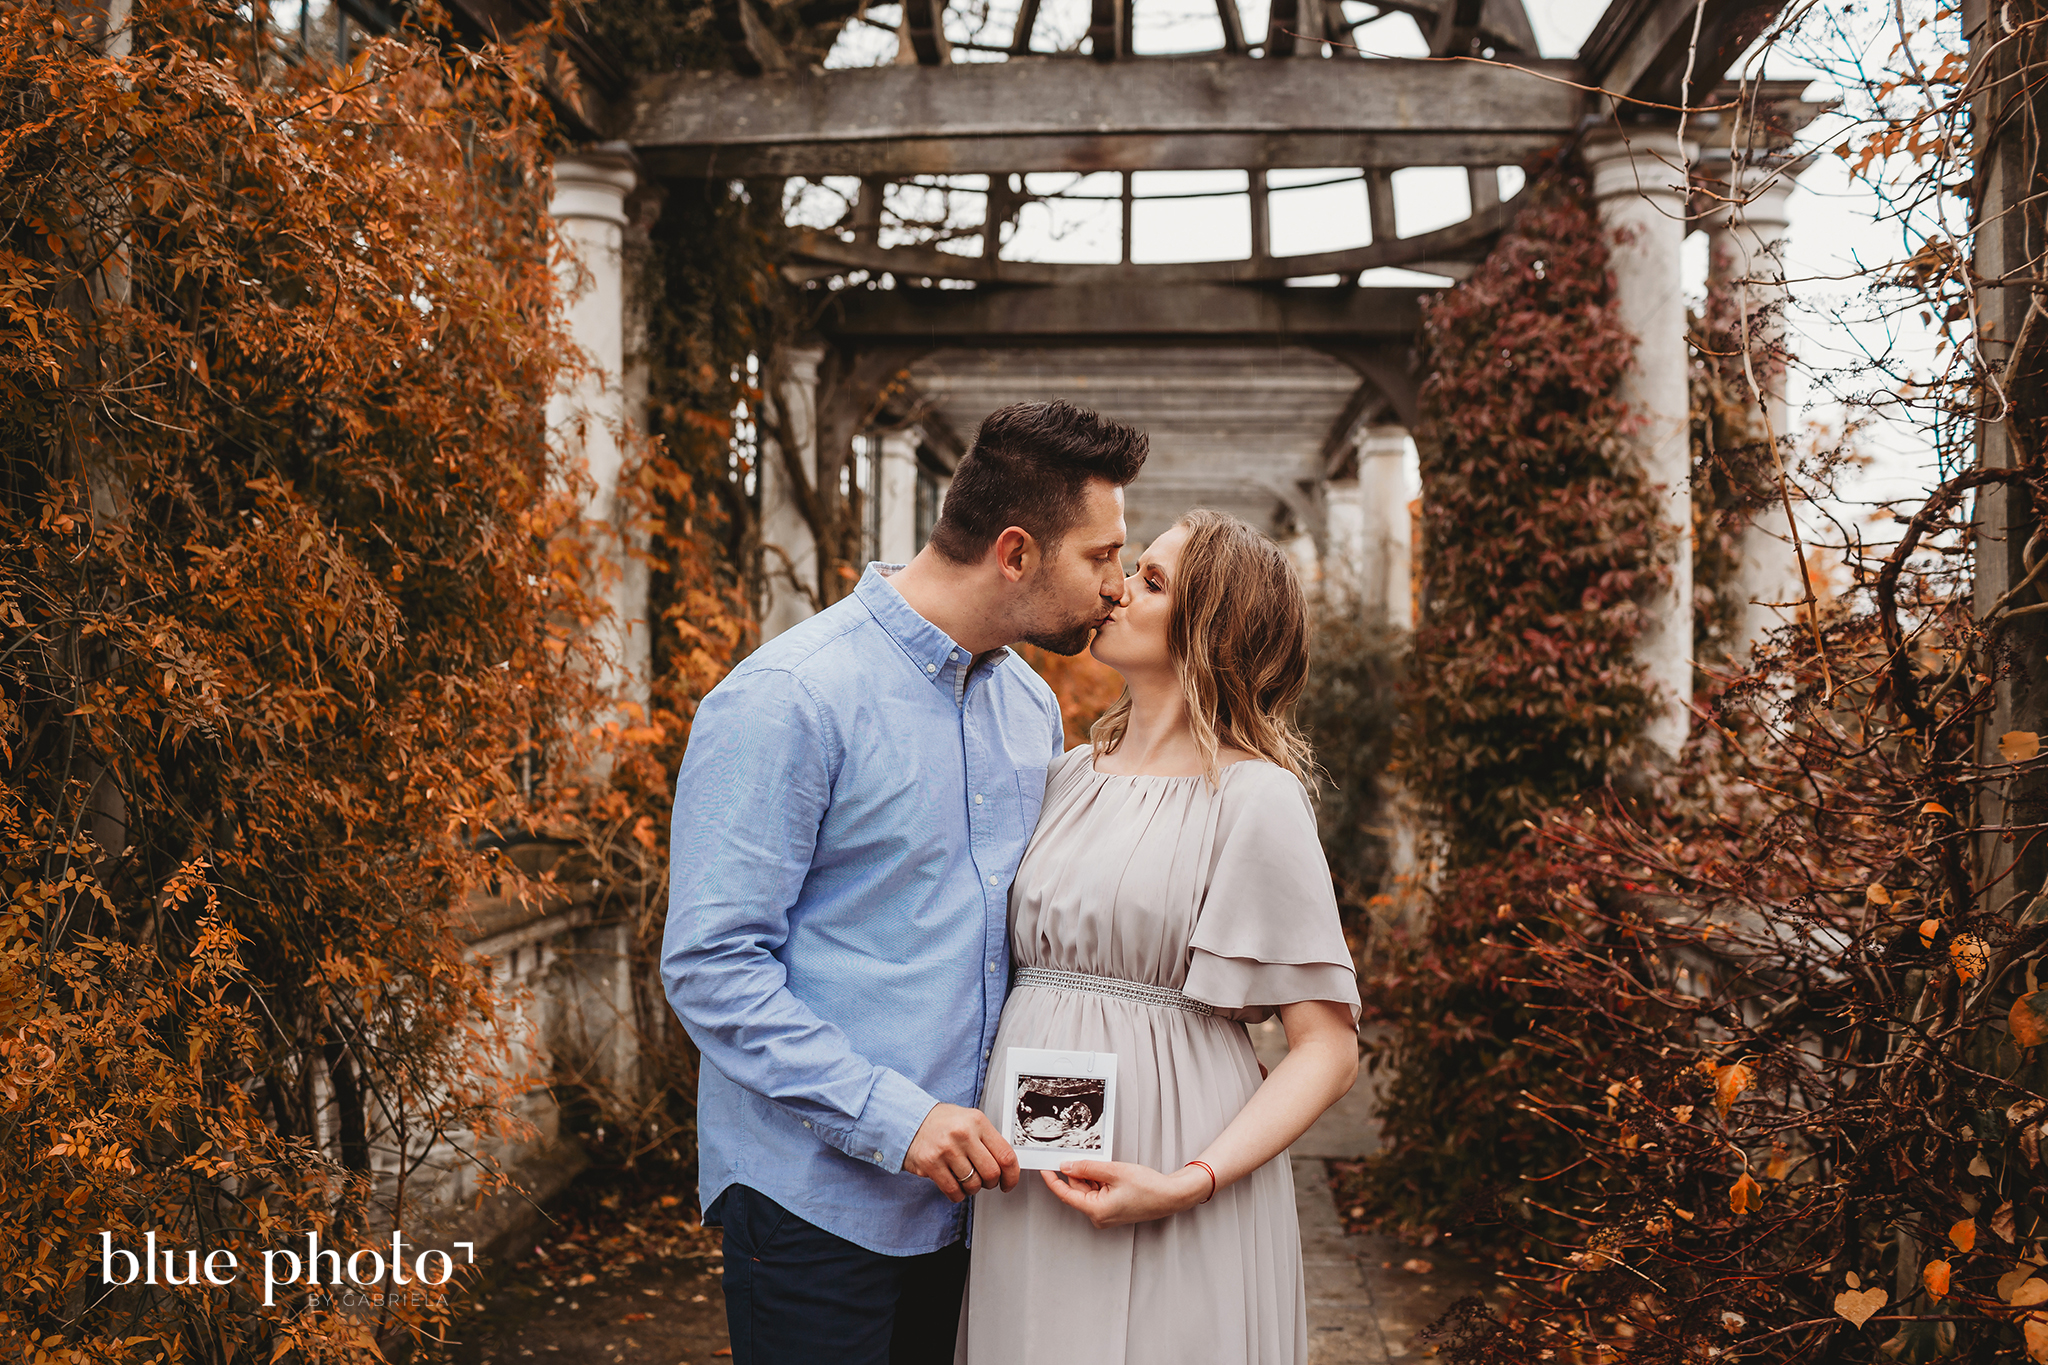 Dominika and her autumn maternity session at Hill Garden and Pergola, North London